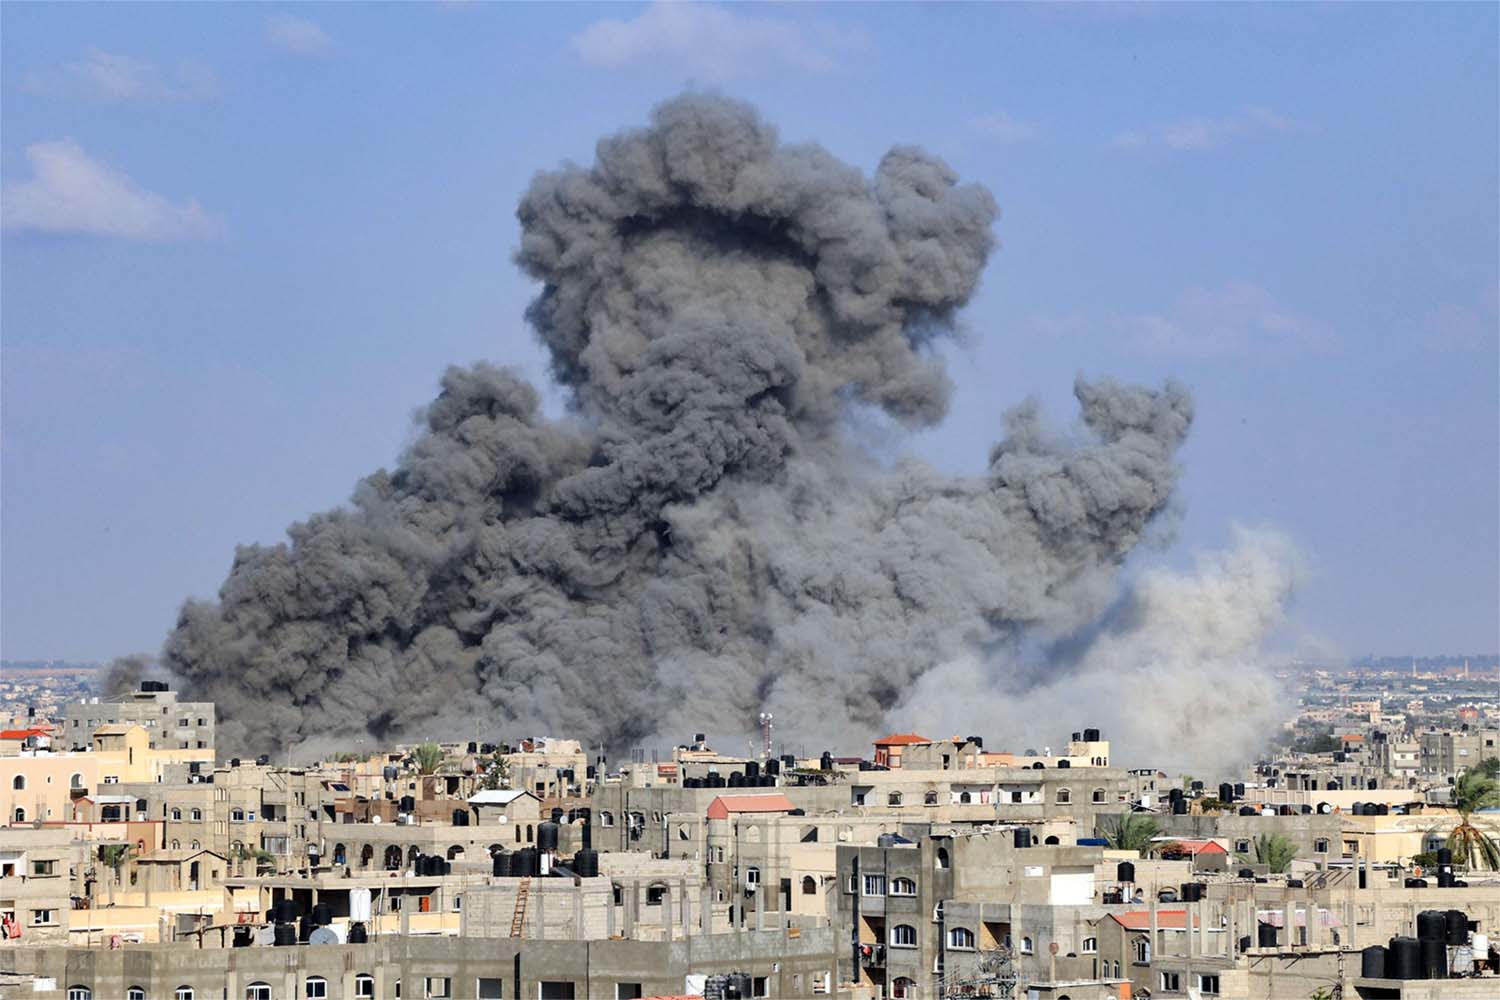 The pounding of Gaza continues unabated